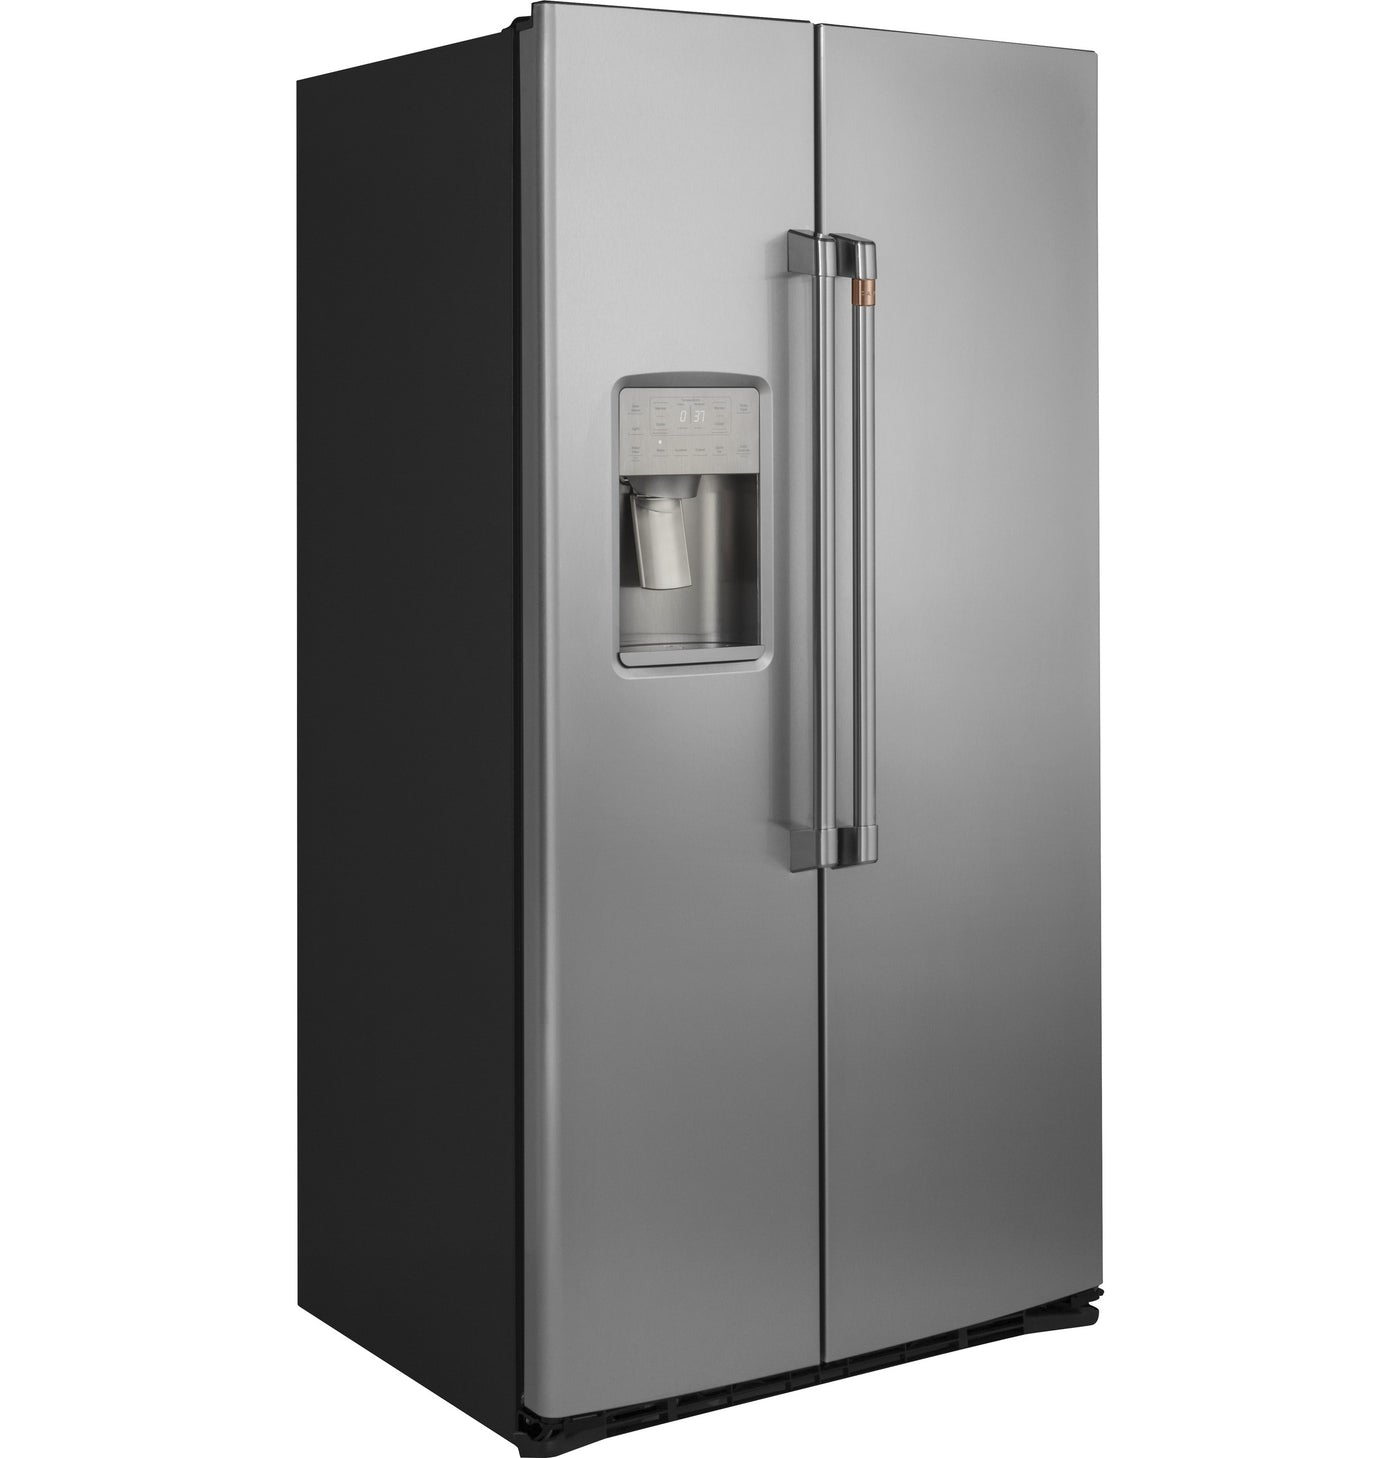 Café Stainless Steel 36" Counter-Depth Side-by-Side Refrigerator (21.9 Cu. Ft.) - CZS22MP2NS1